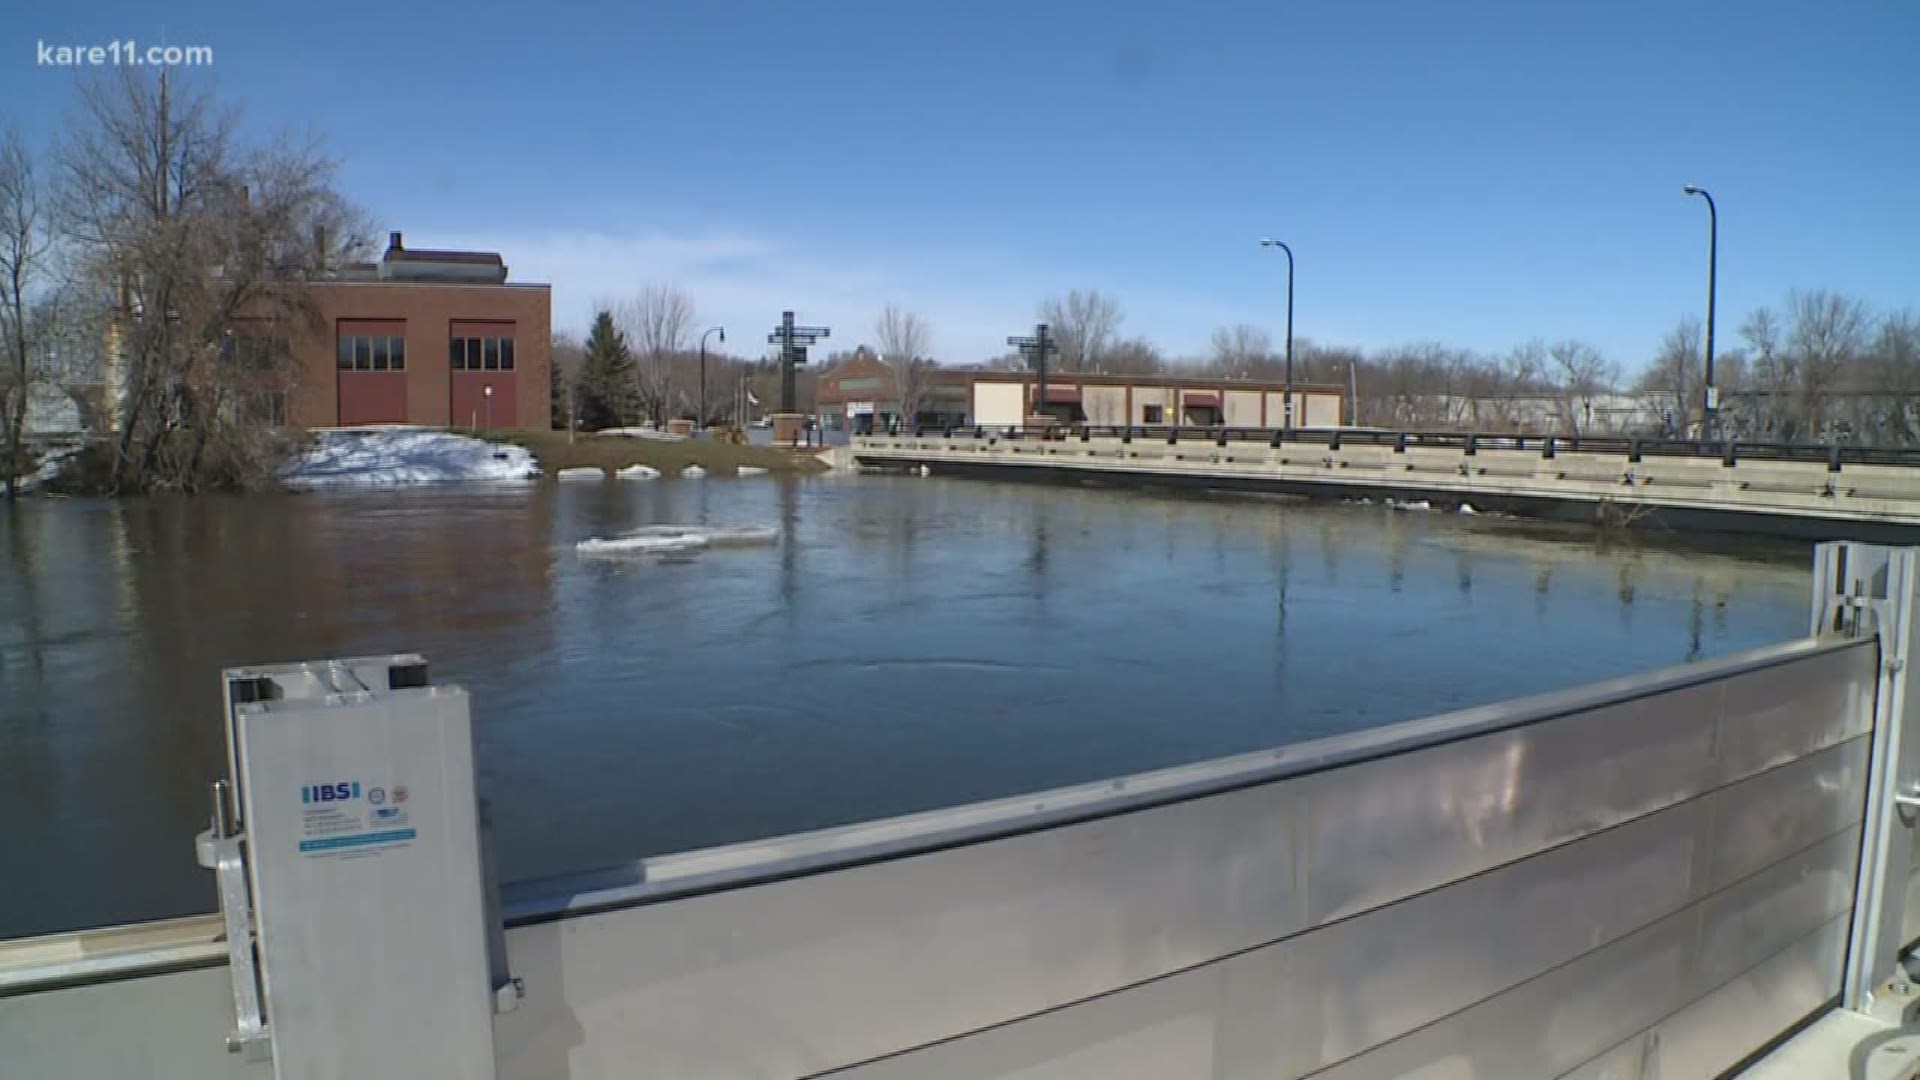 The Crow river's levels are projected to be under flood wall levels but city officials say they are putting the walls up to protect against ice-jam-caused floods.